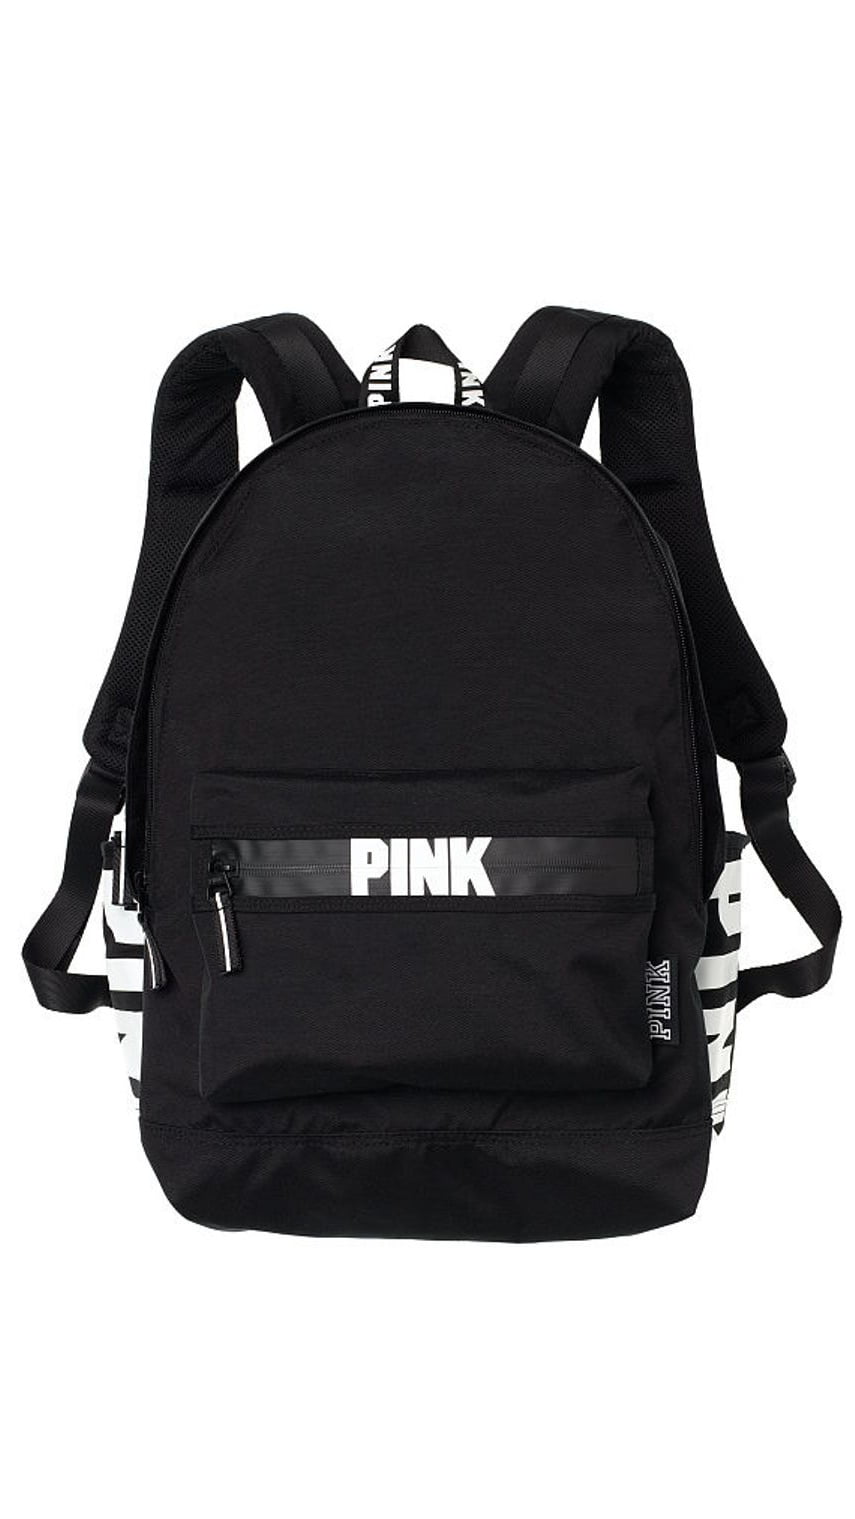 Victorias Secret PINK CAMPUS Backpack WHITE CAMO BRAND NEW 